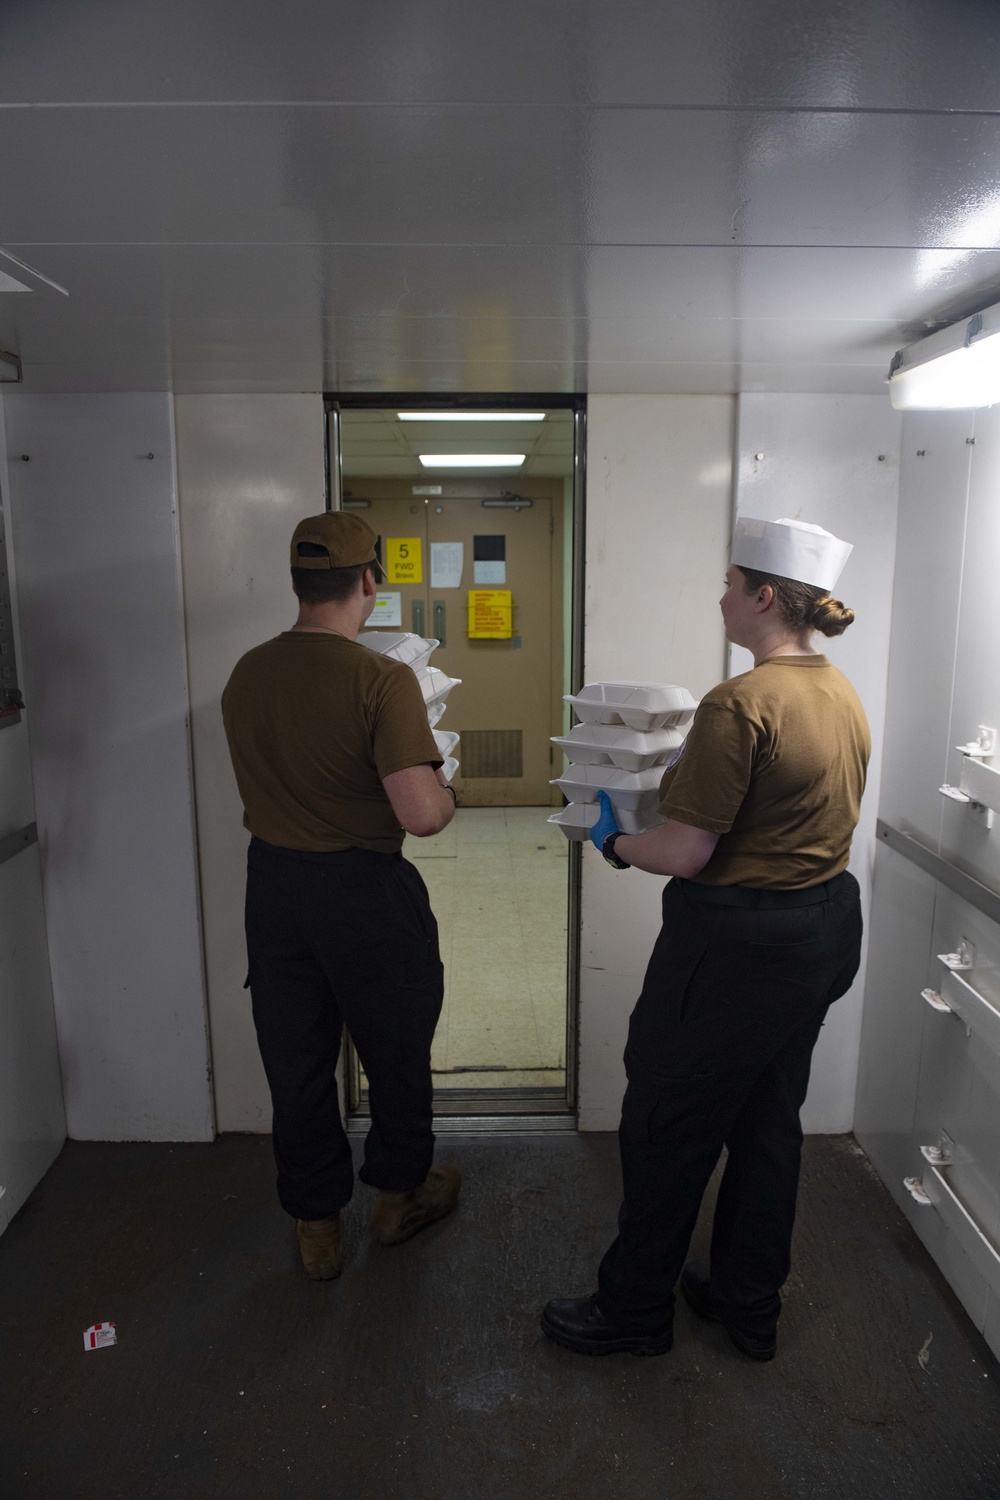 USNS Comfort Galley Accommodates Patient Dietary Requirements in New York City